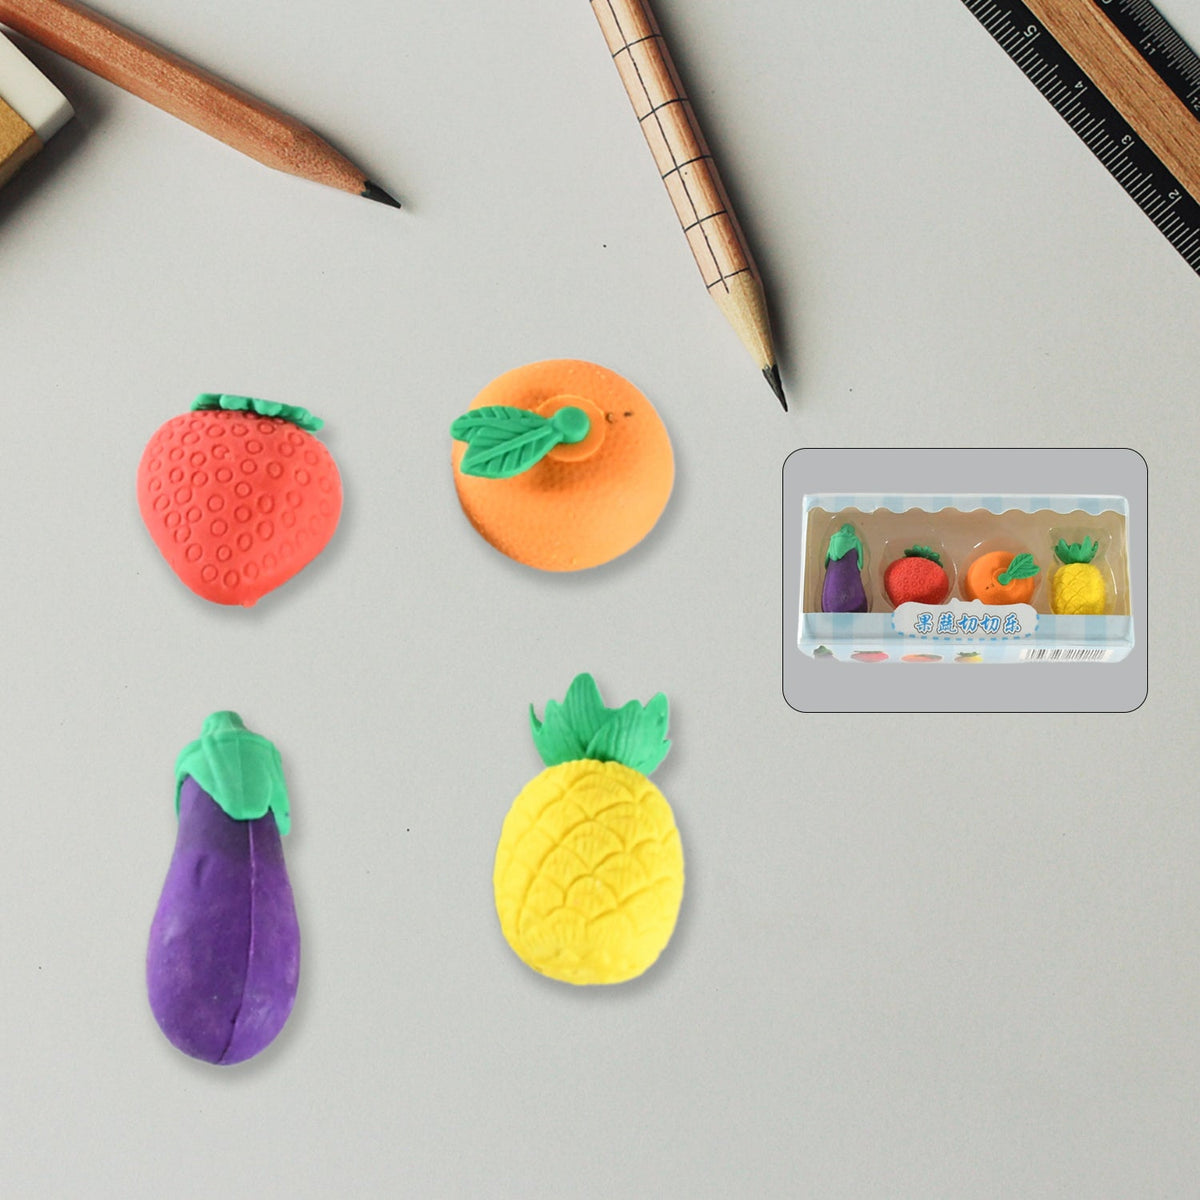 8760 Mini Cute Vegetables and Fruits Erasers or Pencil Rubbers for Kids, 1 Set Fancy & Stylish Colorful Erasers for Children, Eraser Set for Return Gift, Birthday Party, School Prize, 3D Erasers  (4 pc Set)